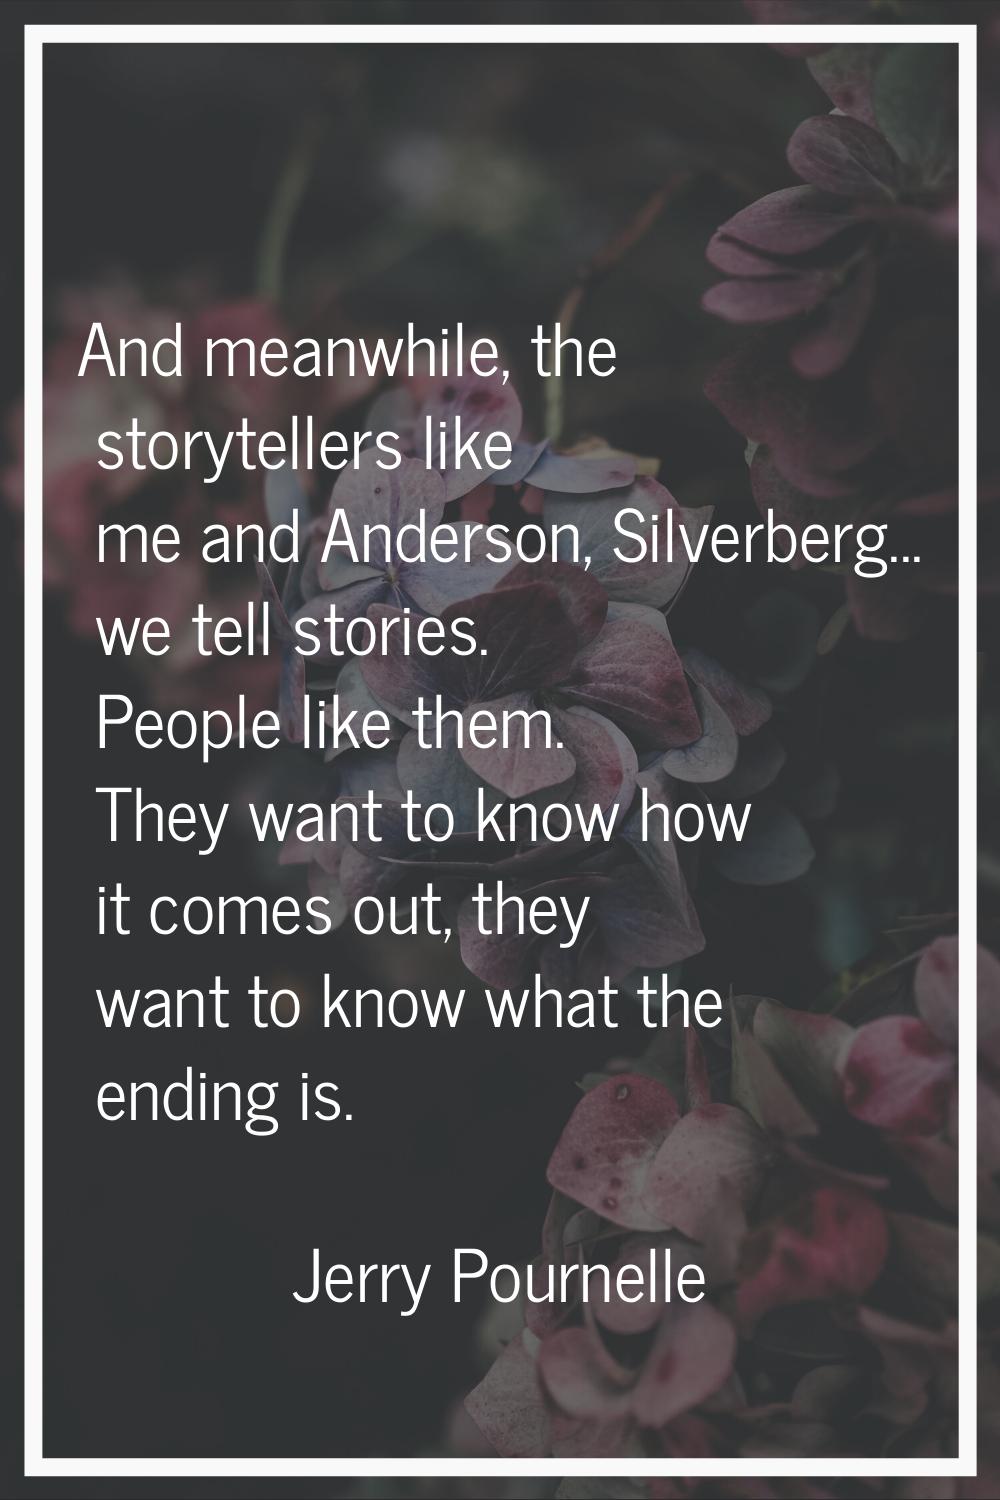 And meanwhile, the storytellers like me and Anderson, Silverberg... we tell stories. People like th